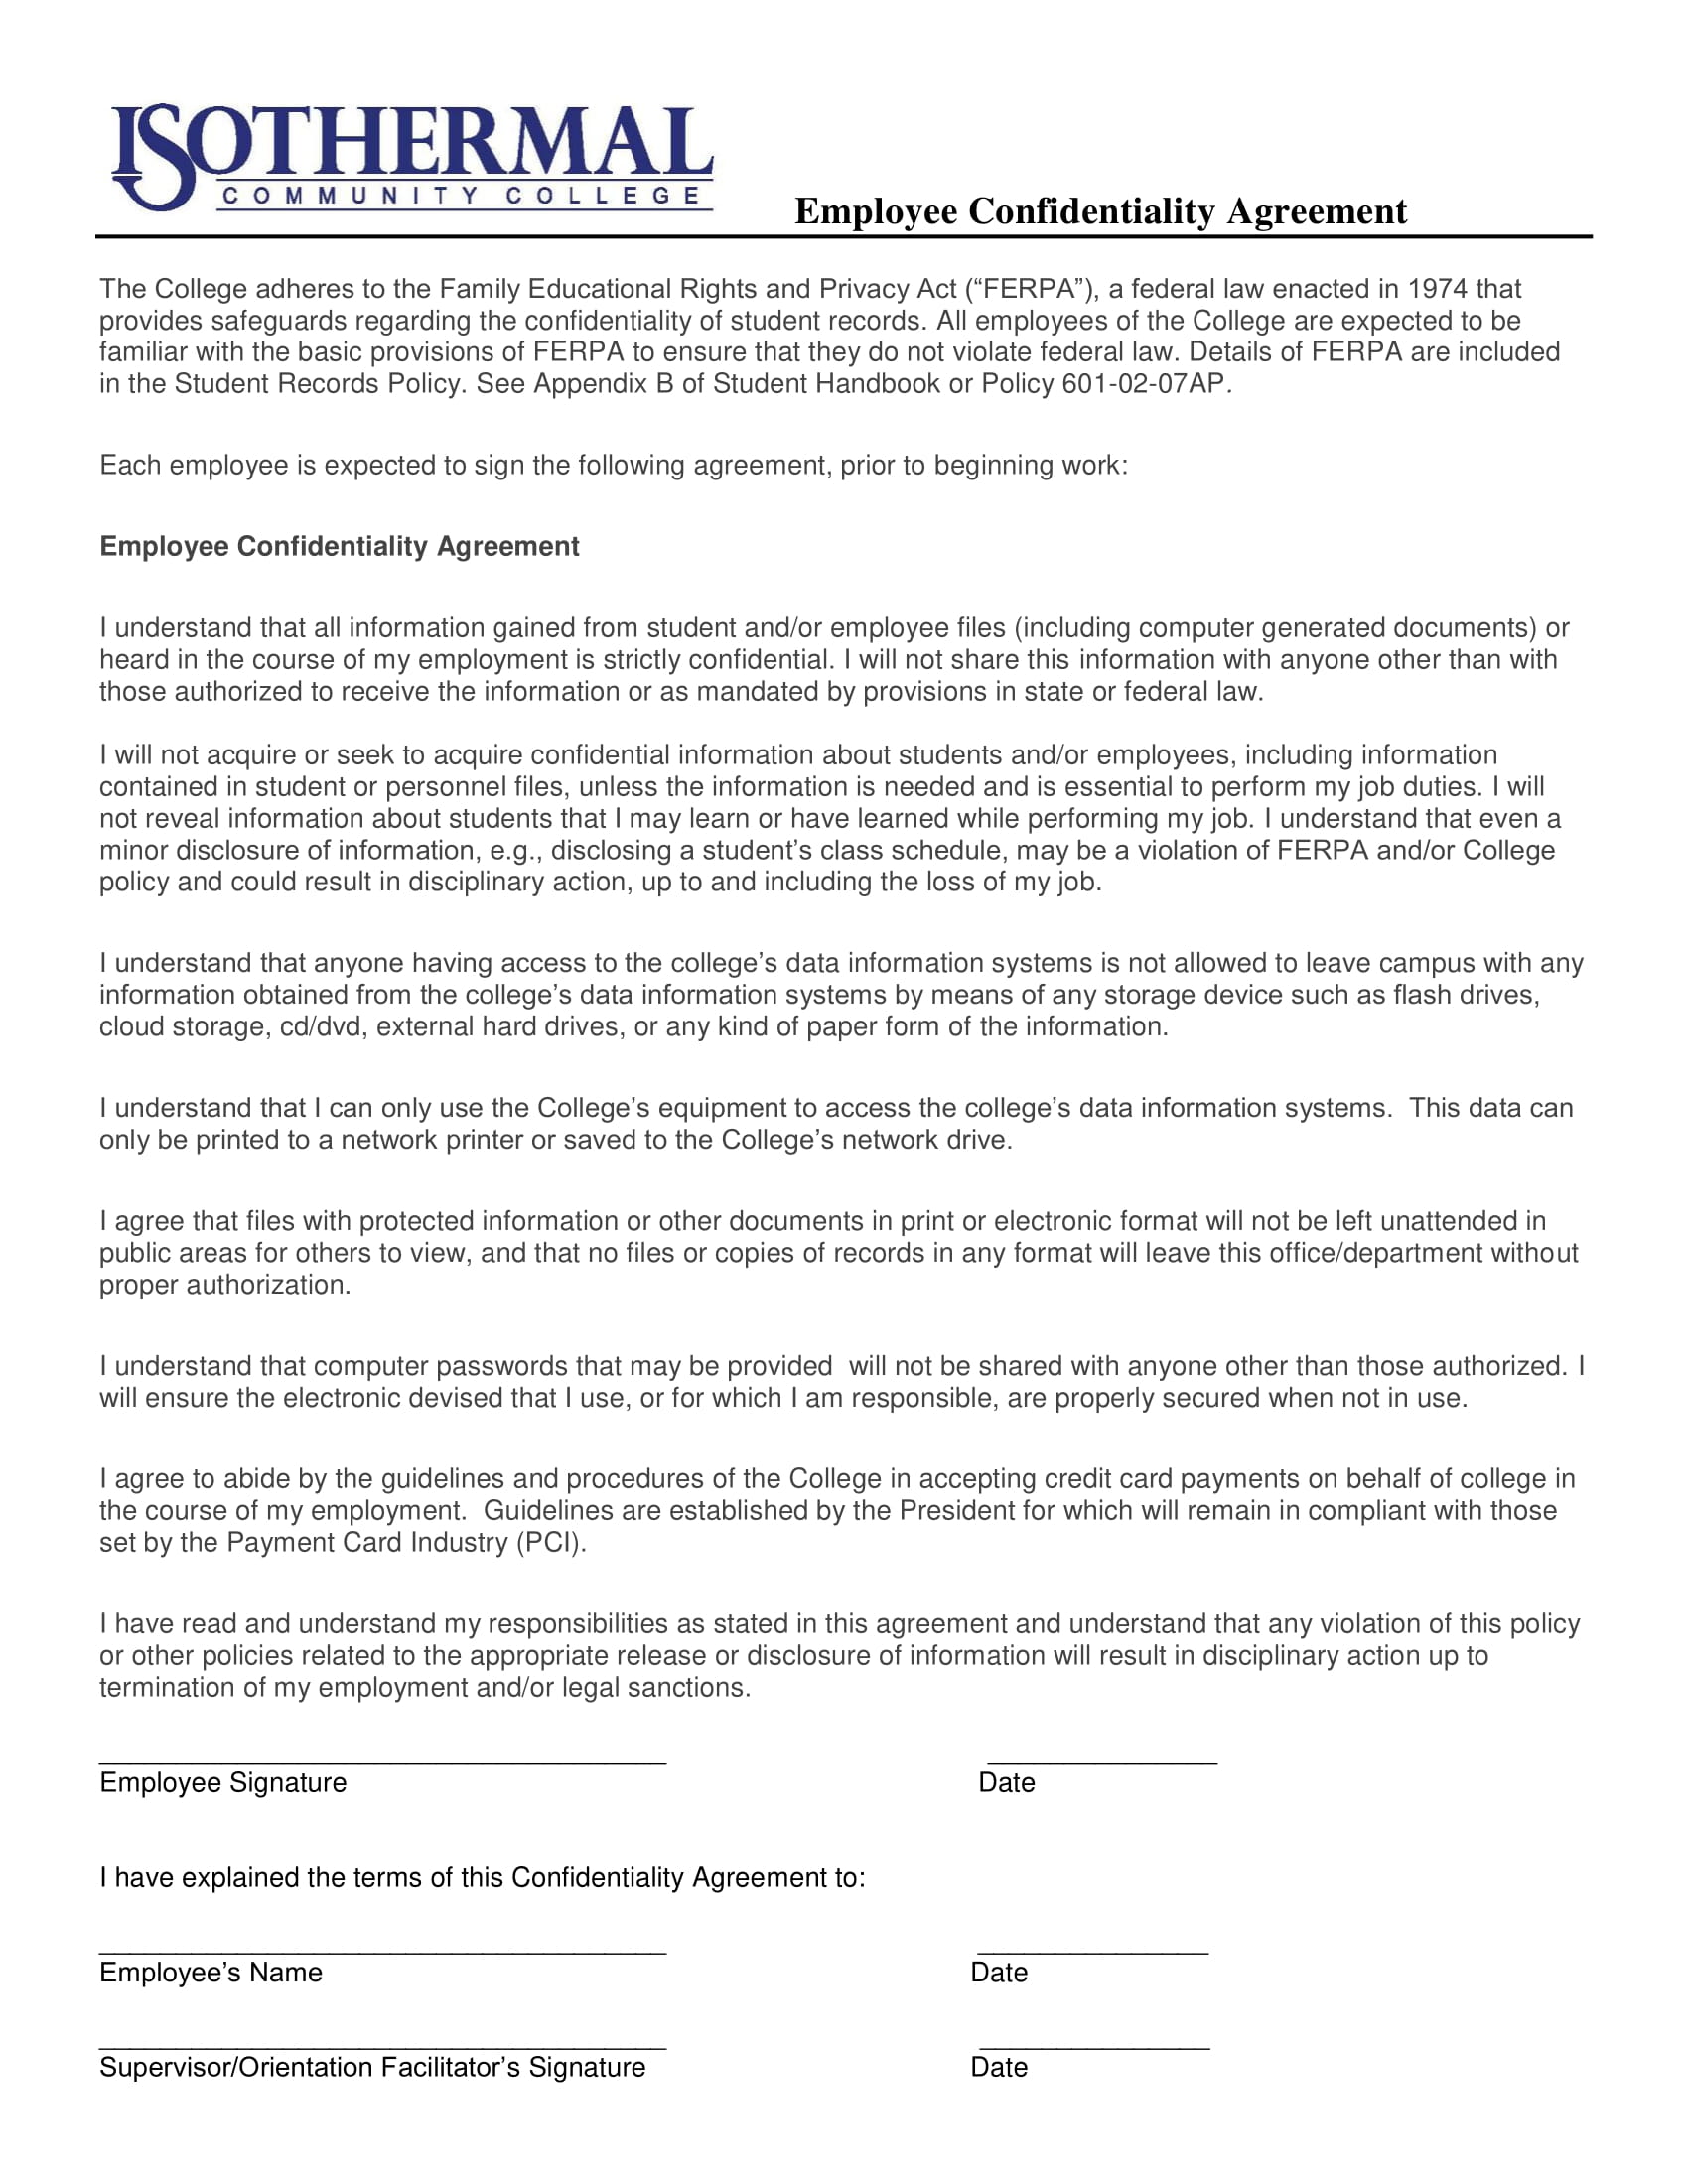 Employee Confidentiality Agreement Template Word Master